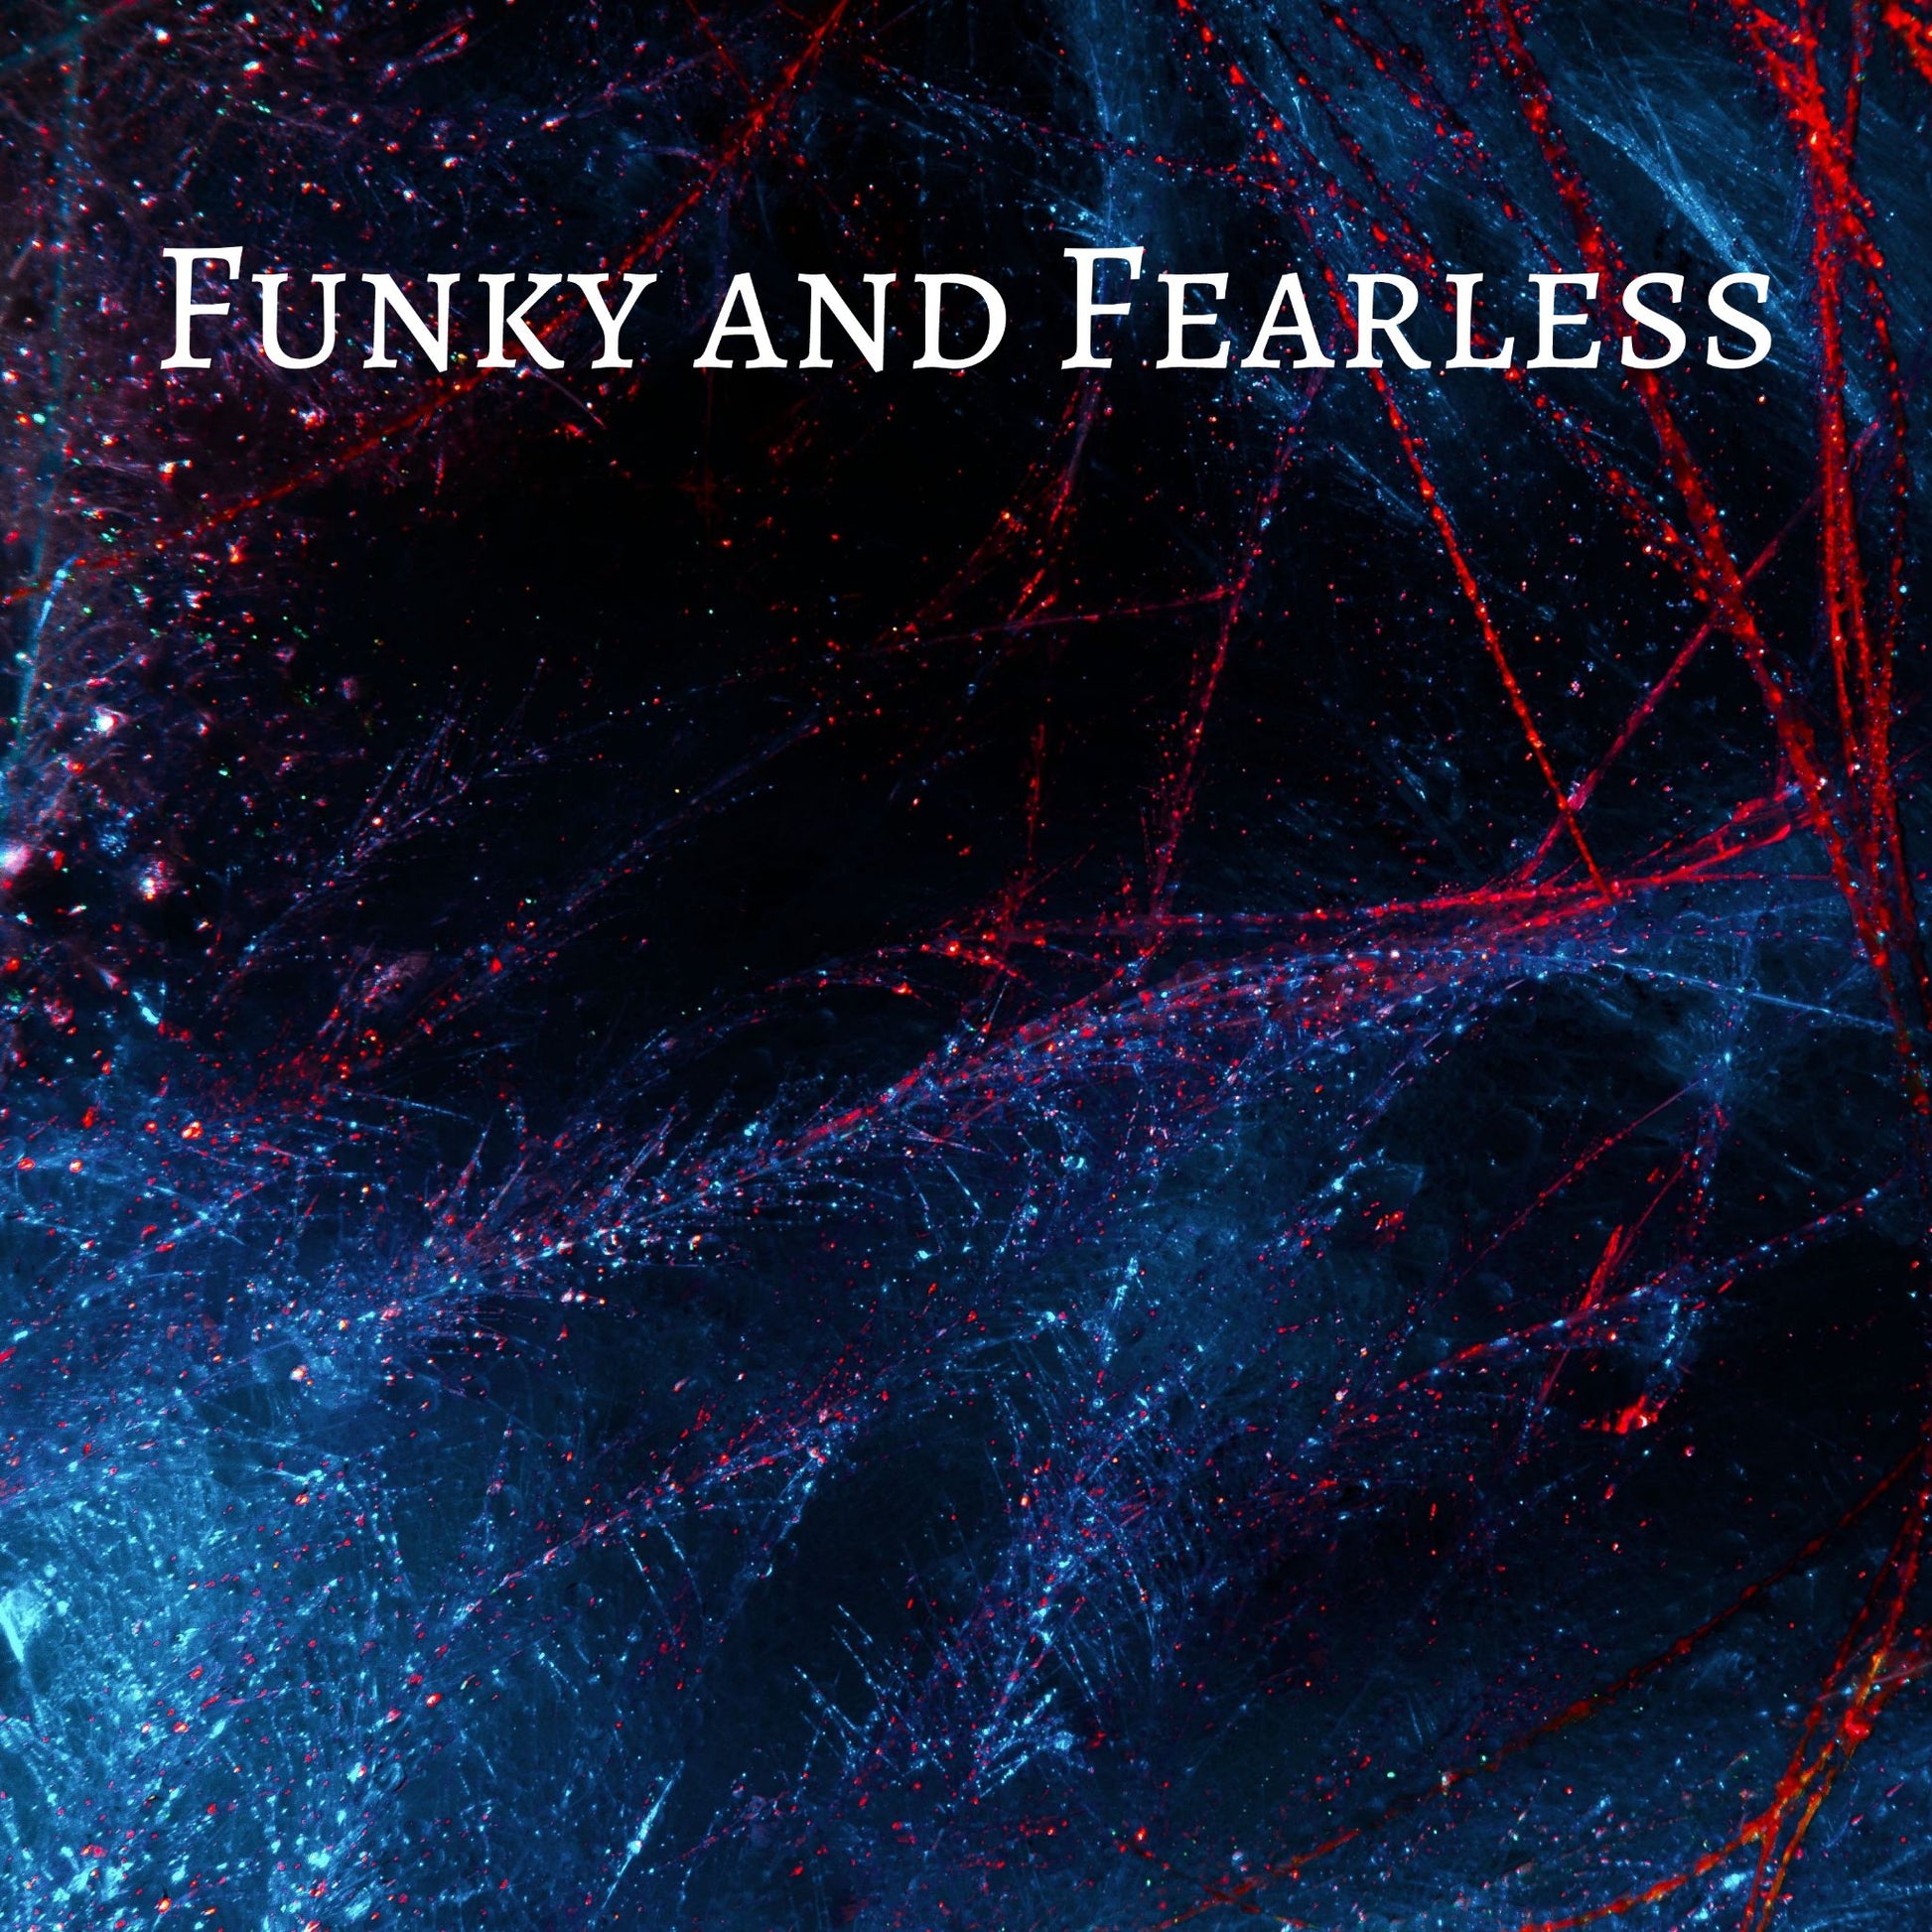 CD Cover of song Funky and Fearless